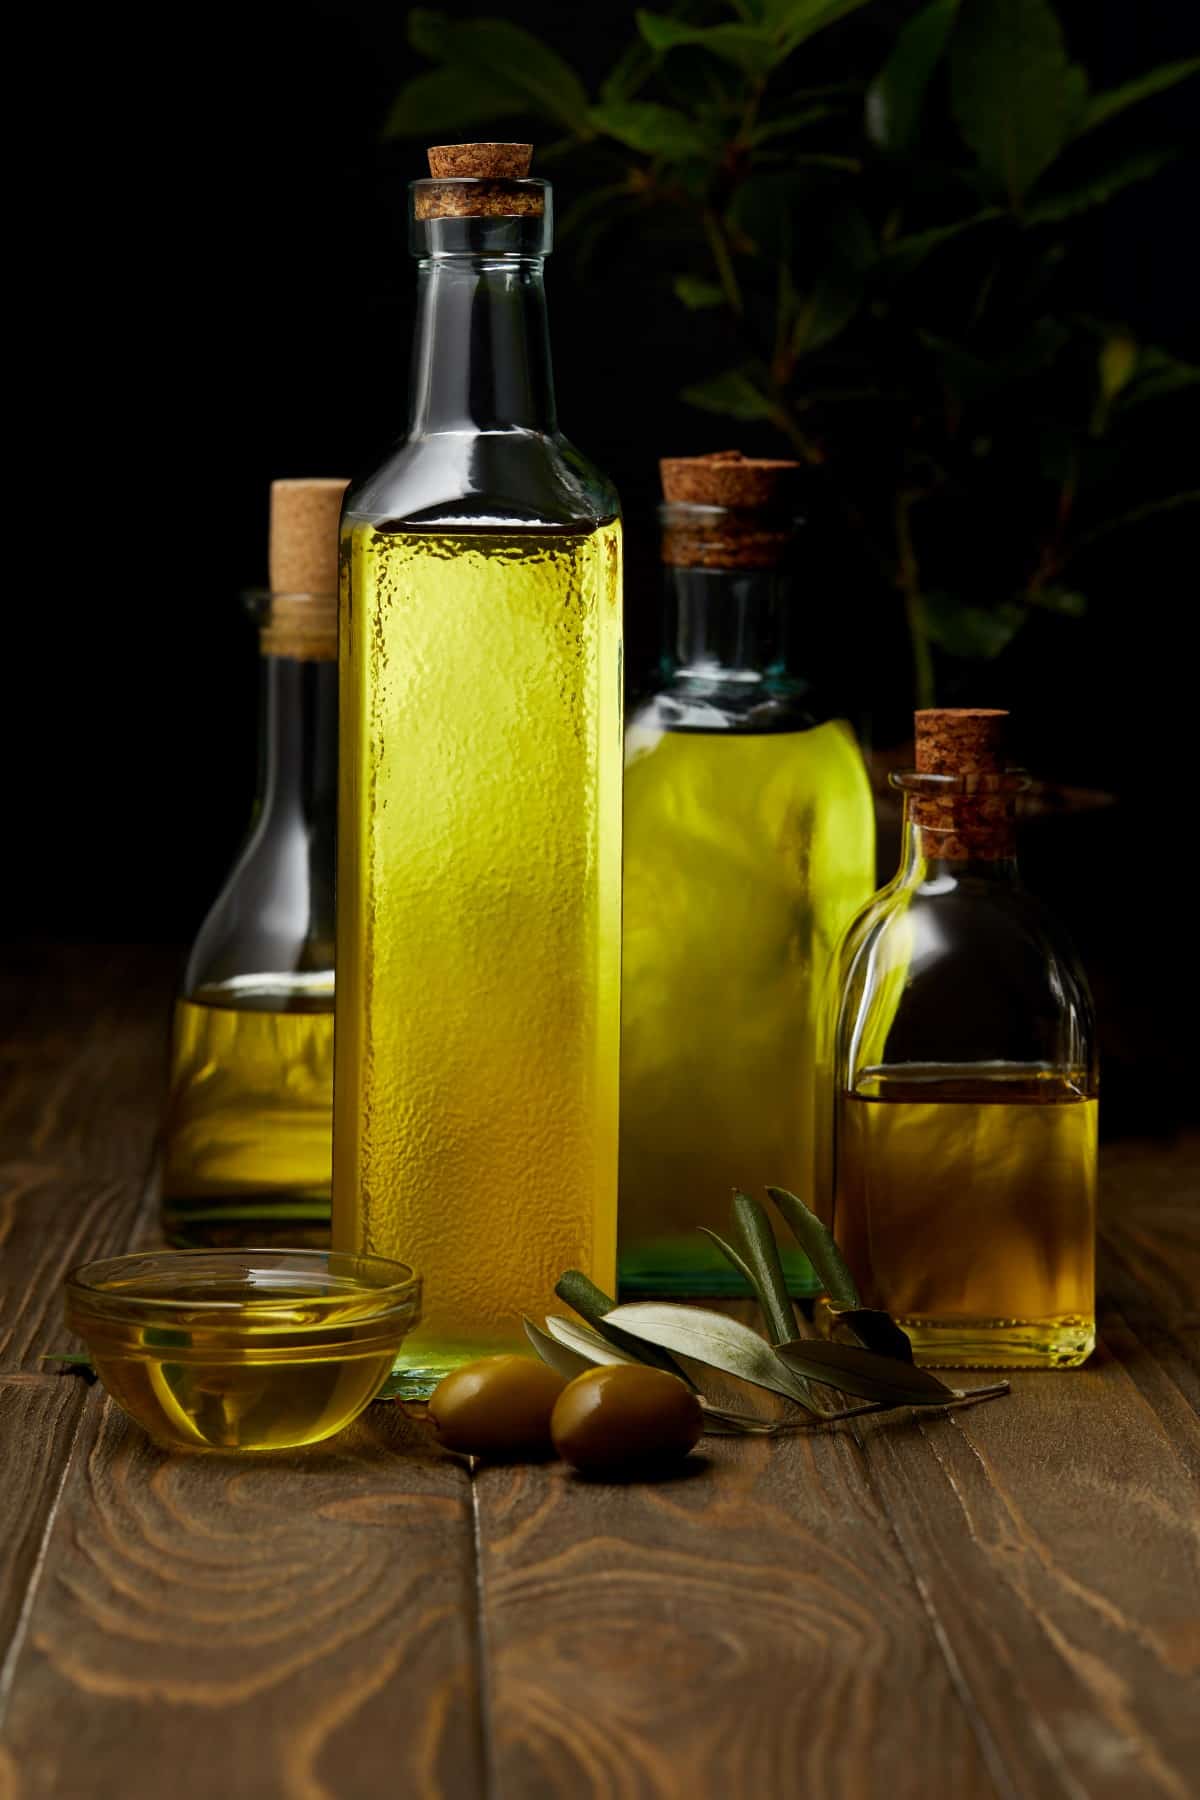 Bottles of various olive oil on wooden surface.